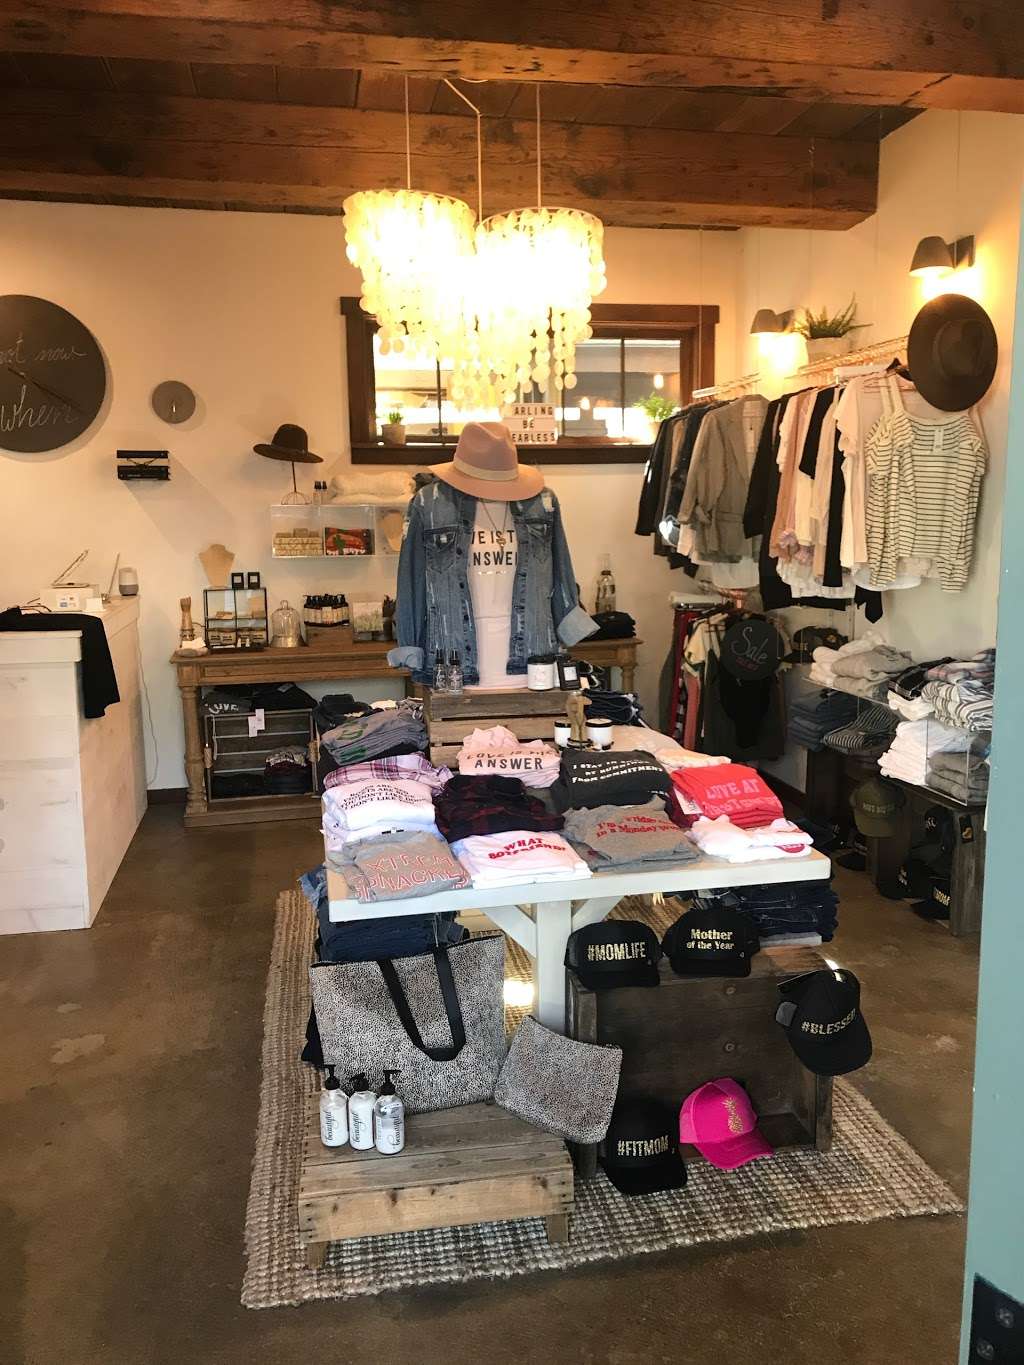 Pink Arrows Boutique | 301 1st St, Benicia, CA 94510, USA | Phone: (844) 264-6456